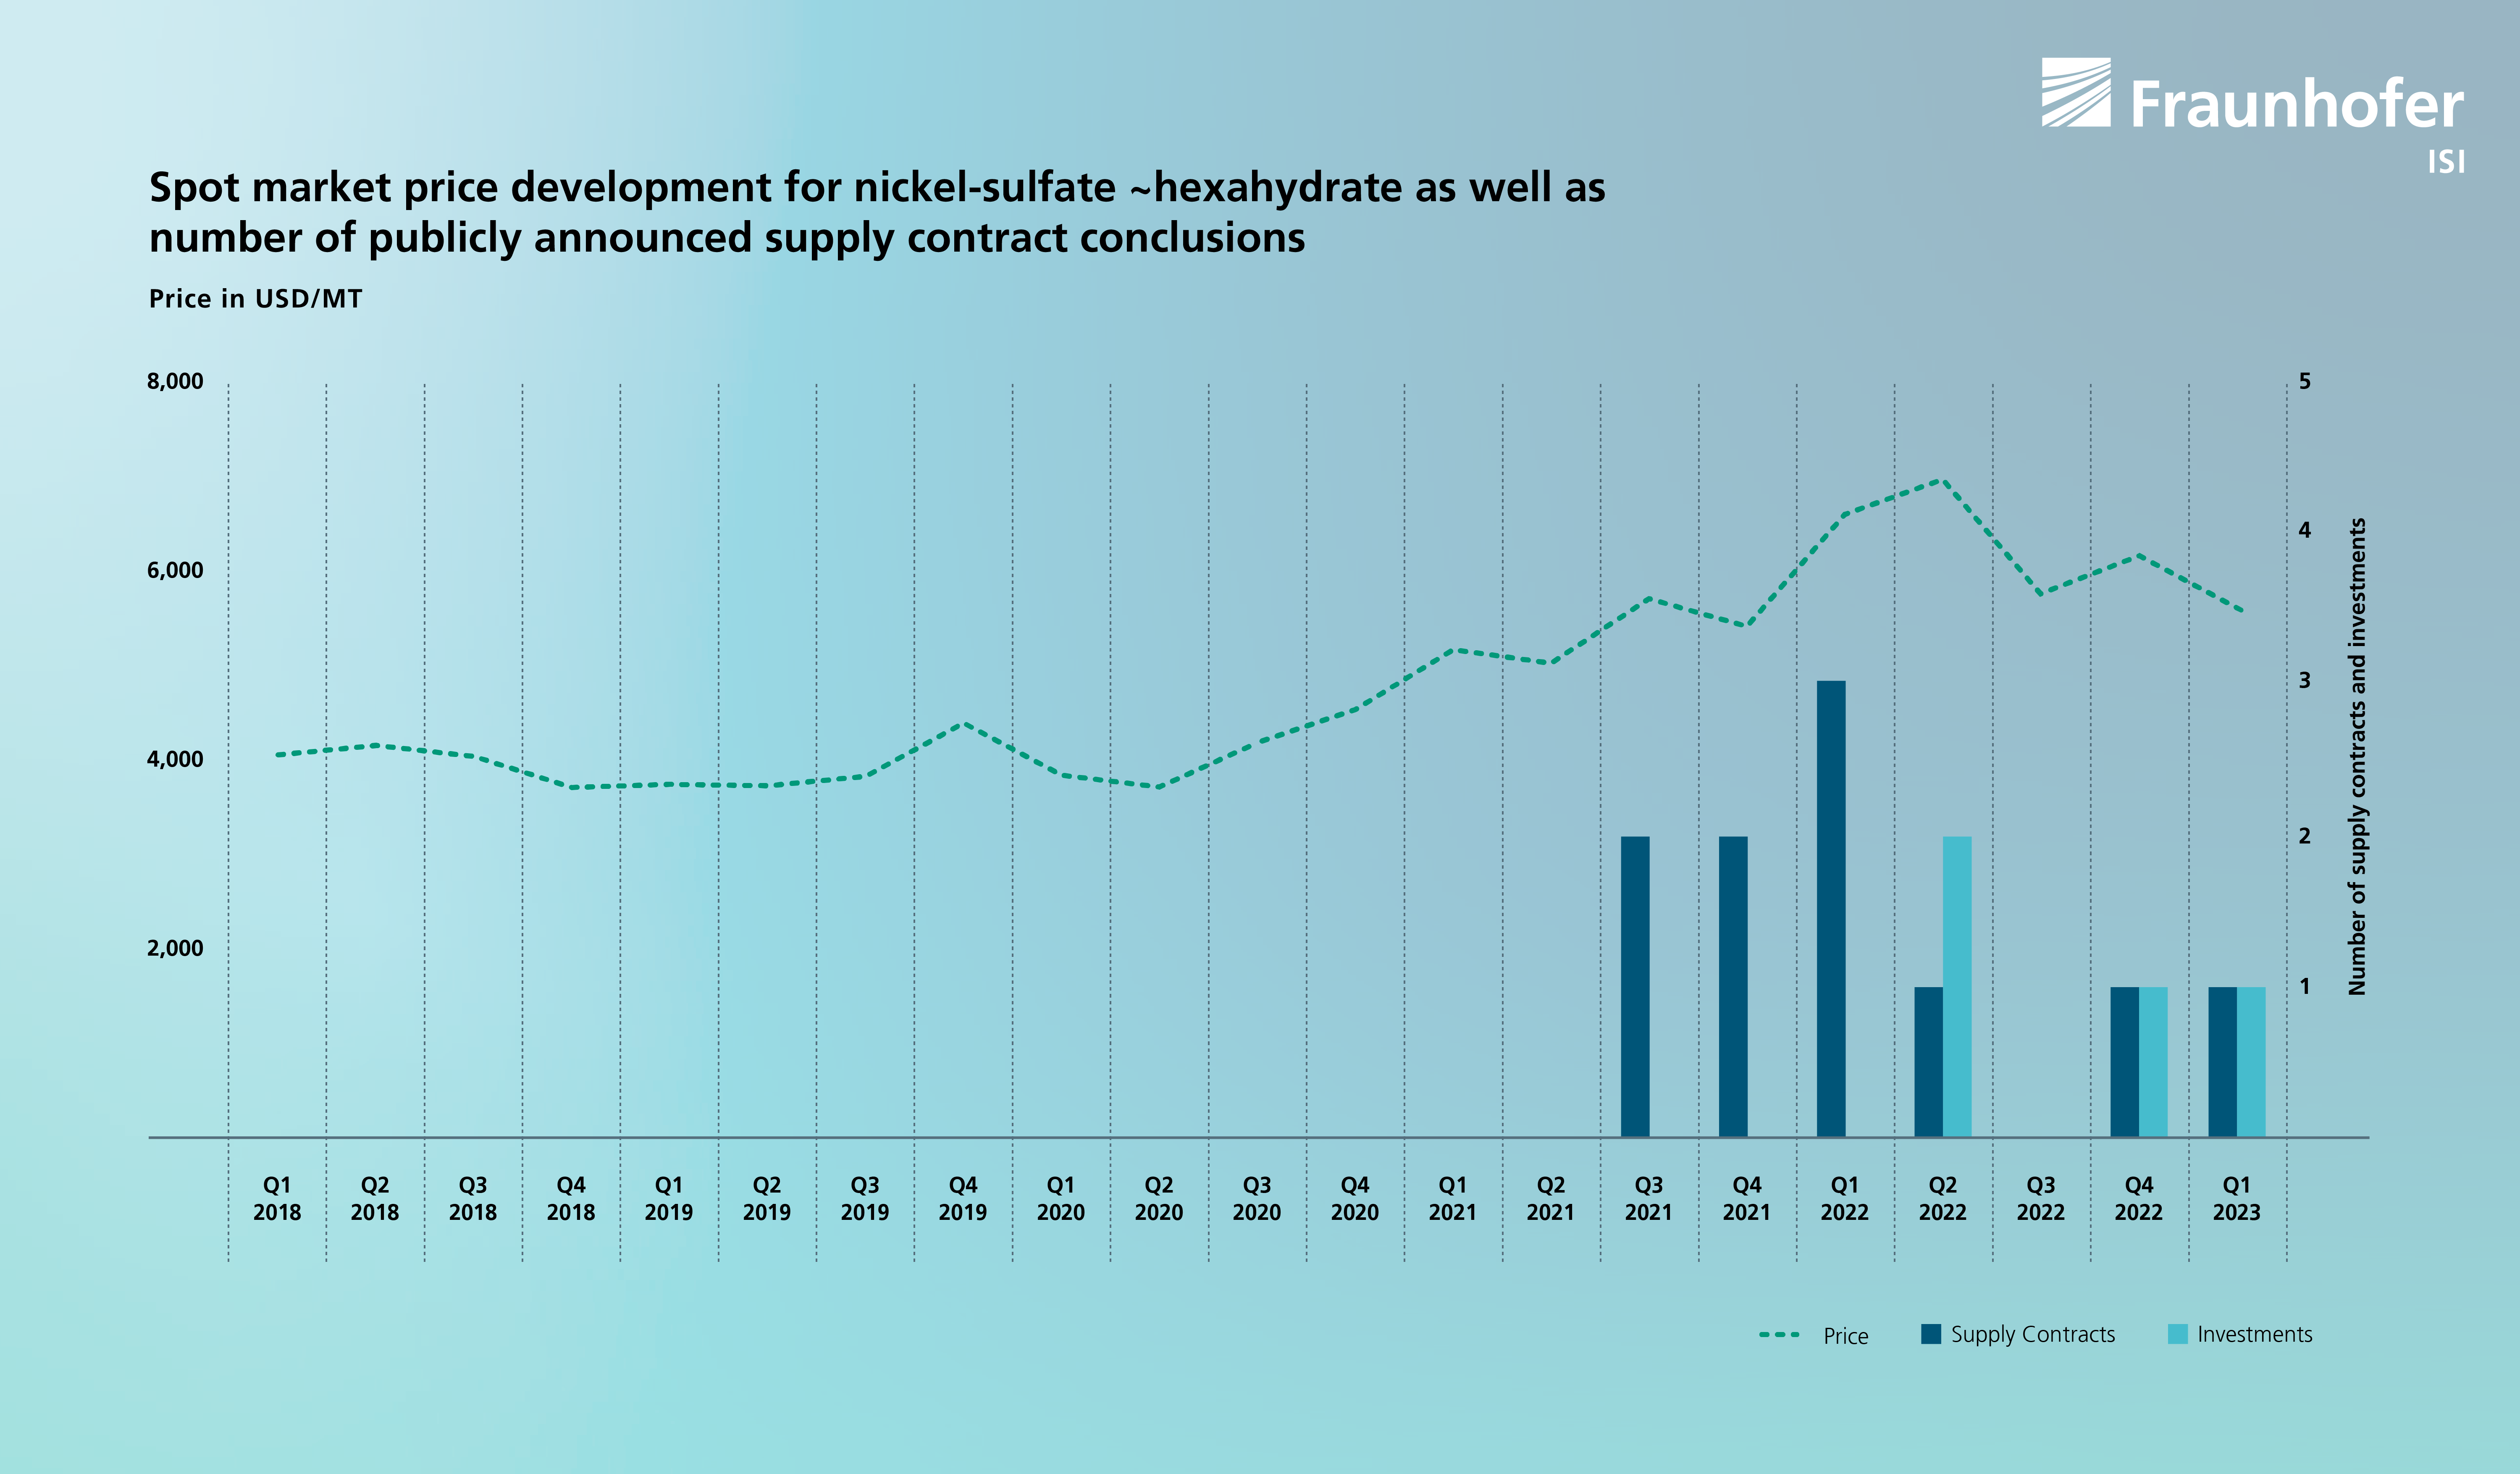 Spot market price development for nickel-sulfate ~hexahydrate as well as number of publicly announced supply contract conclusions.